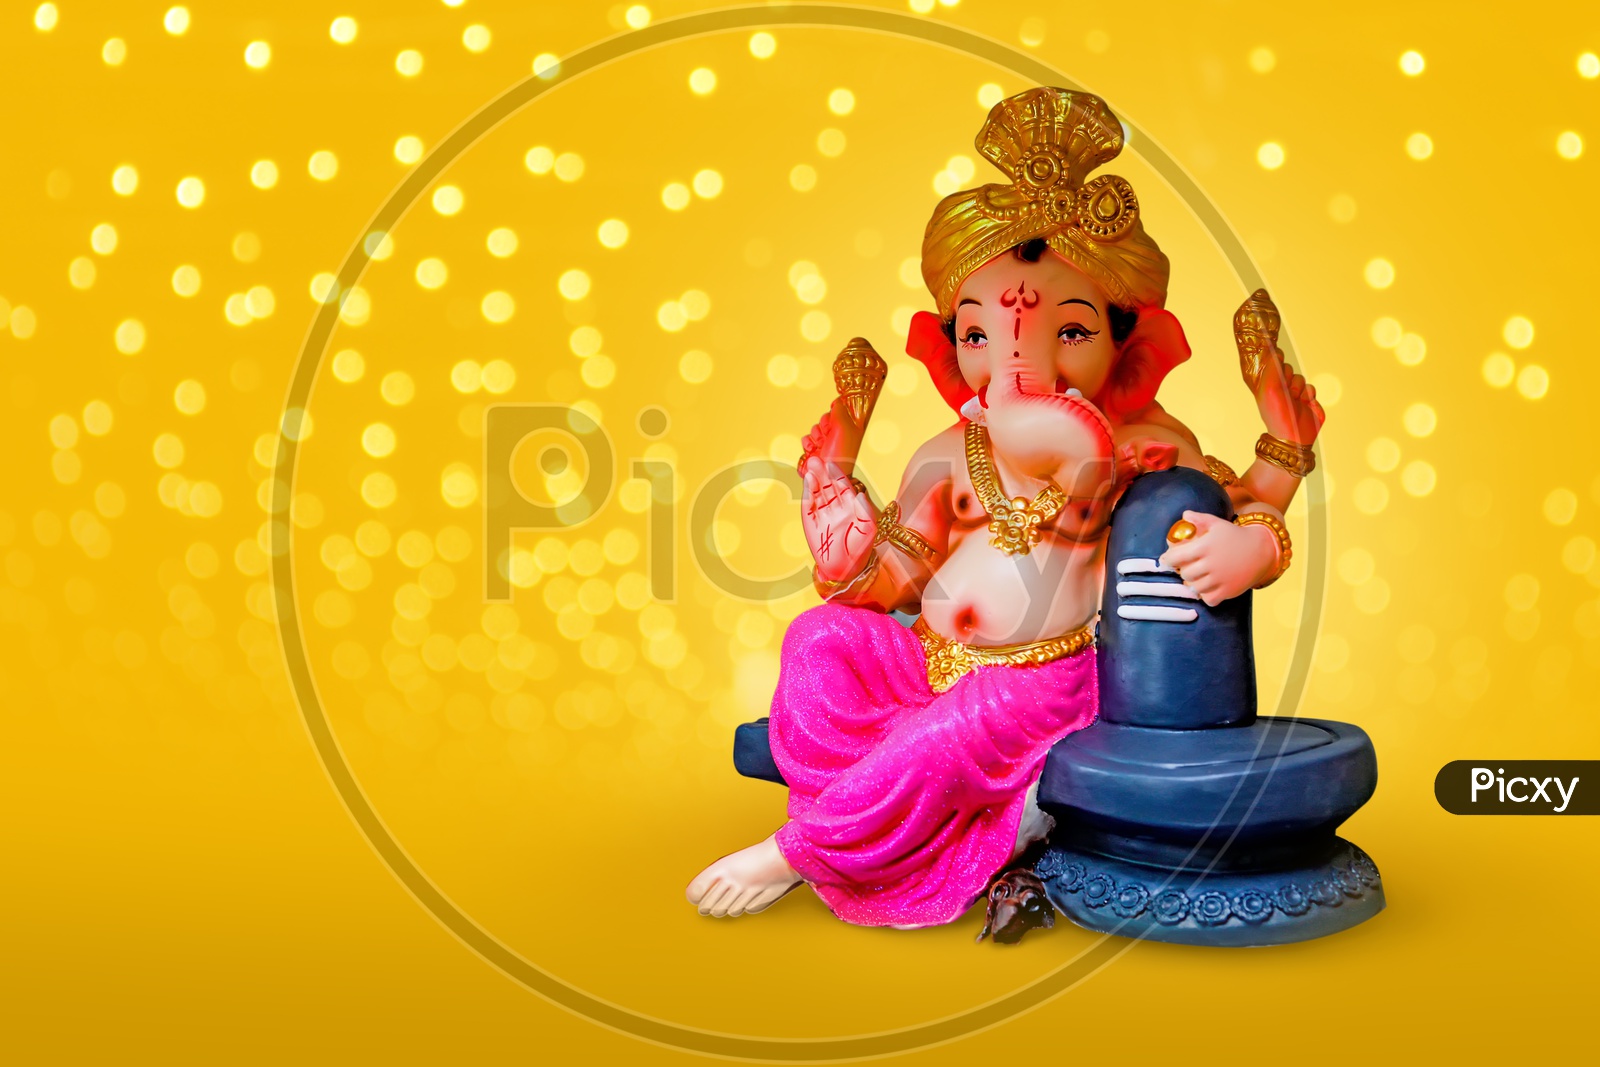 Indian Hindu God Lord Ganesh Template For Festival Wishes